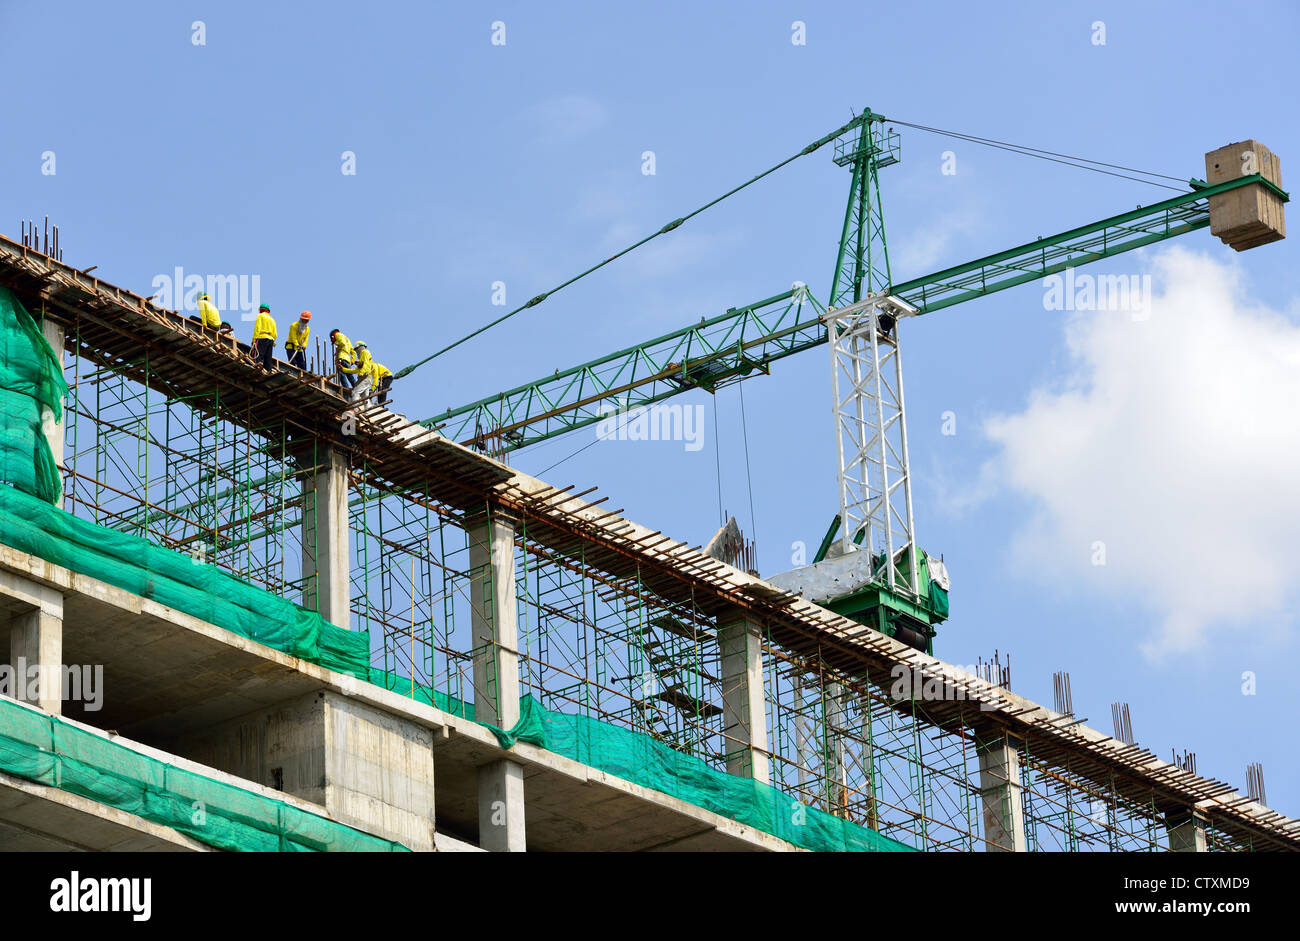 Group of the workers are working on high constructionsite. Stock Photo